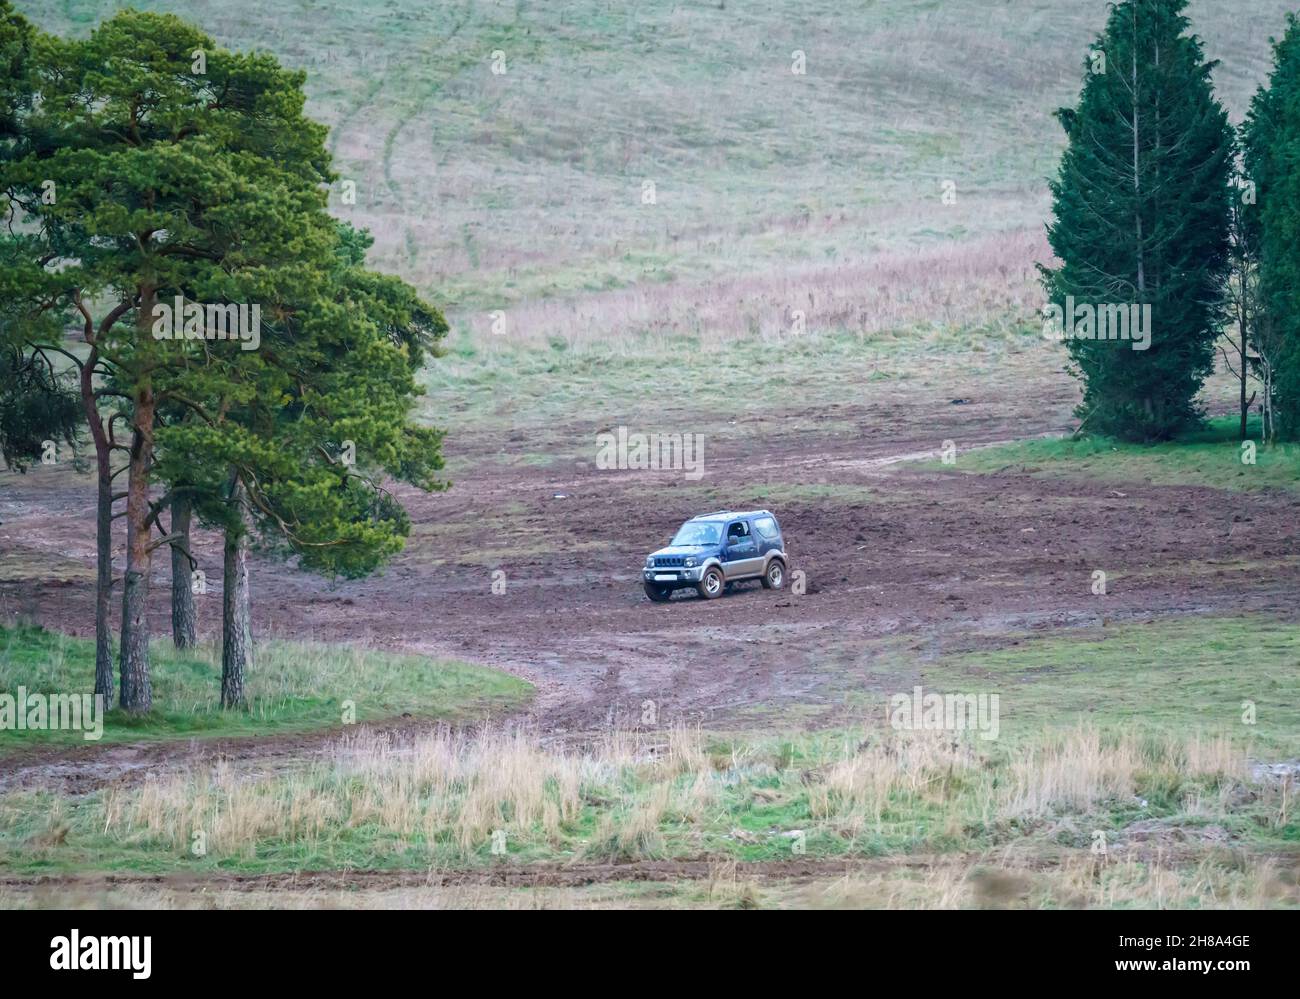 blue and silver Suzuki Jimny 4x4 off-road vehicle driven around a muddy expanse in woodland, Wiltshire UK Stock Photo